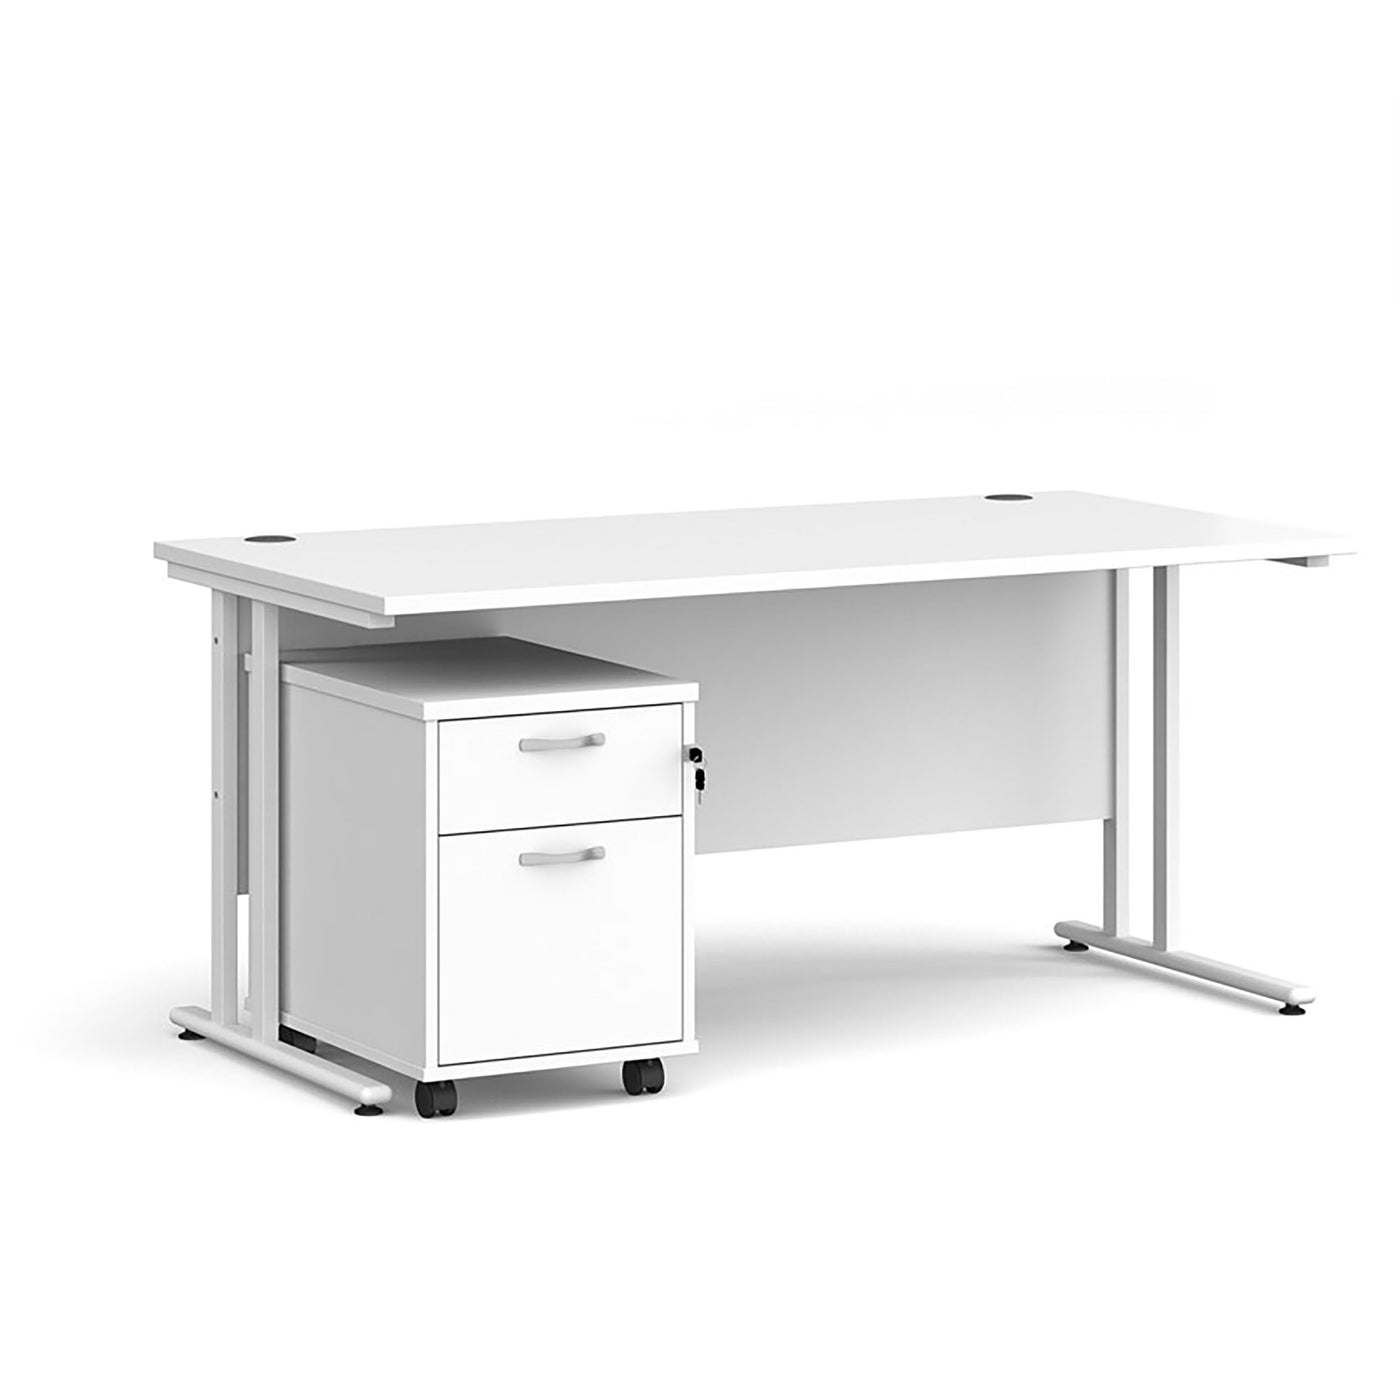 Maestro 25 with 2 Drawer Pedestal | Home Office Desk | Work From Home | Desk with storage | Desk with storage drawers